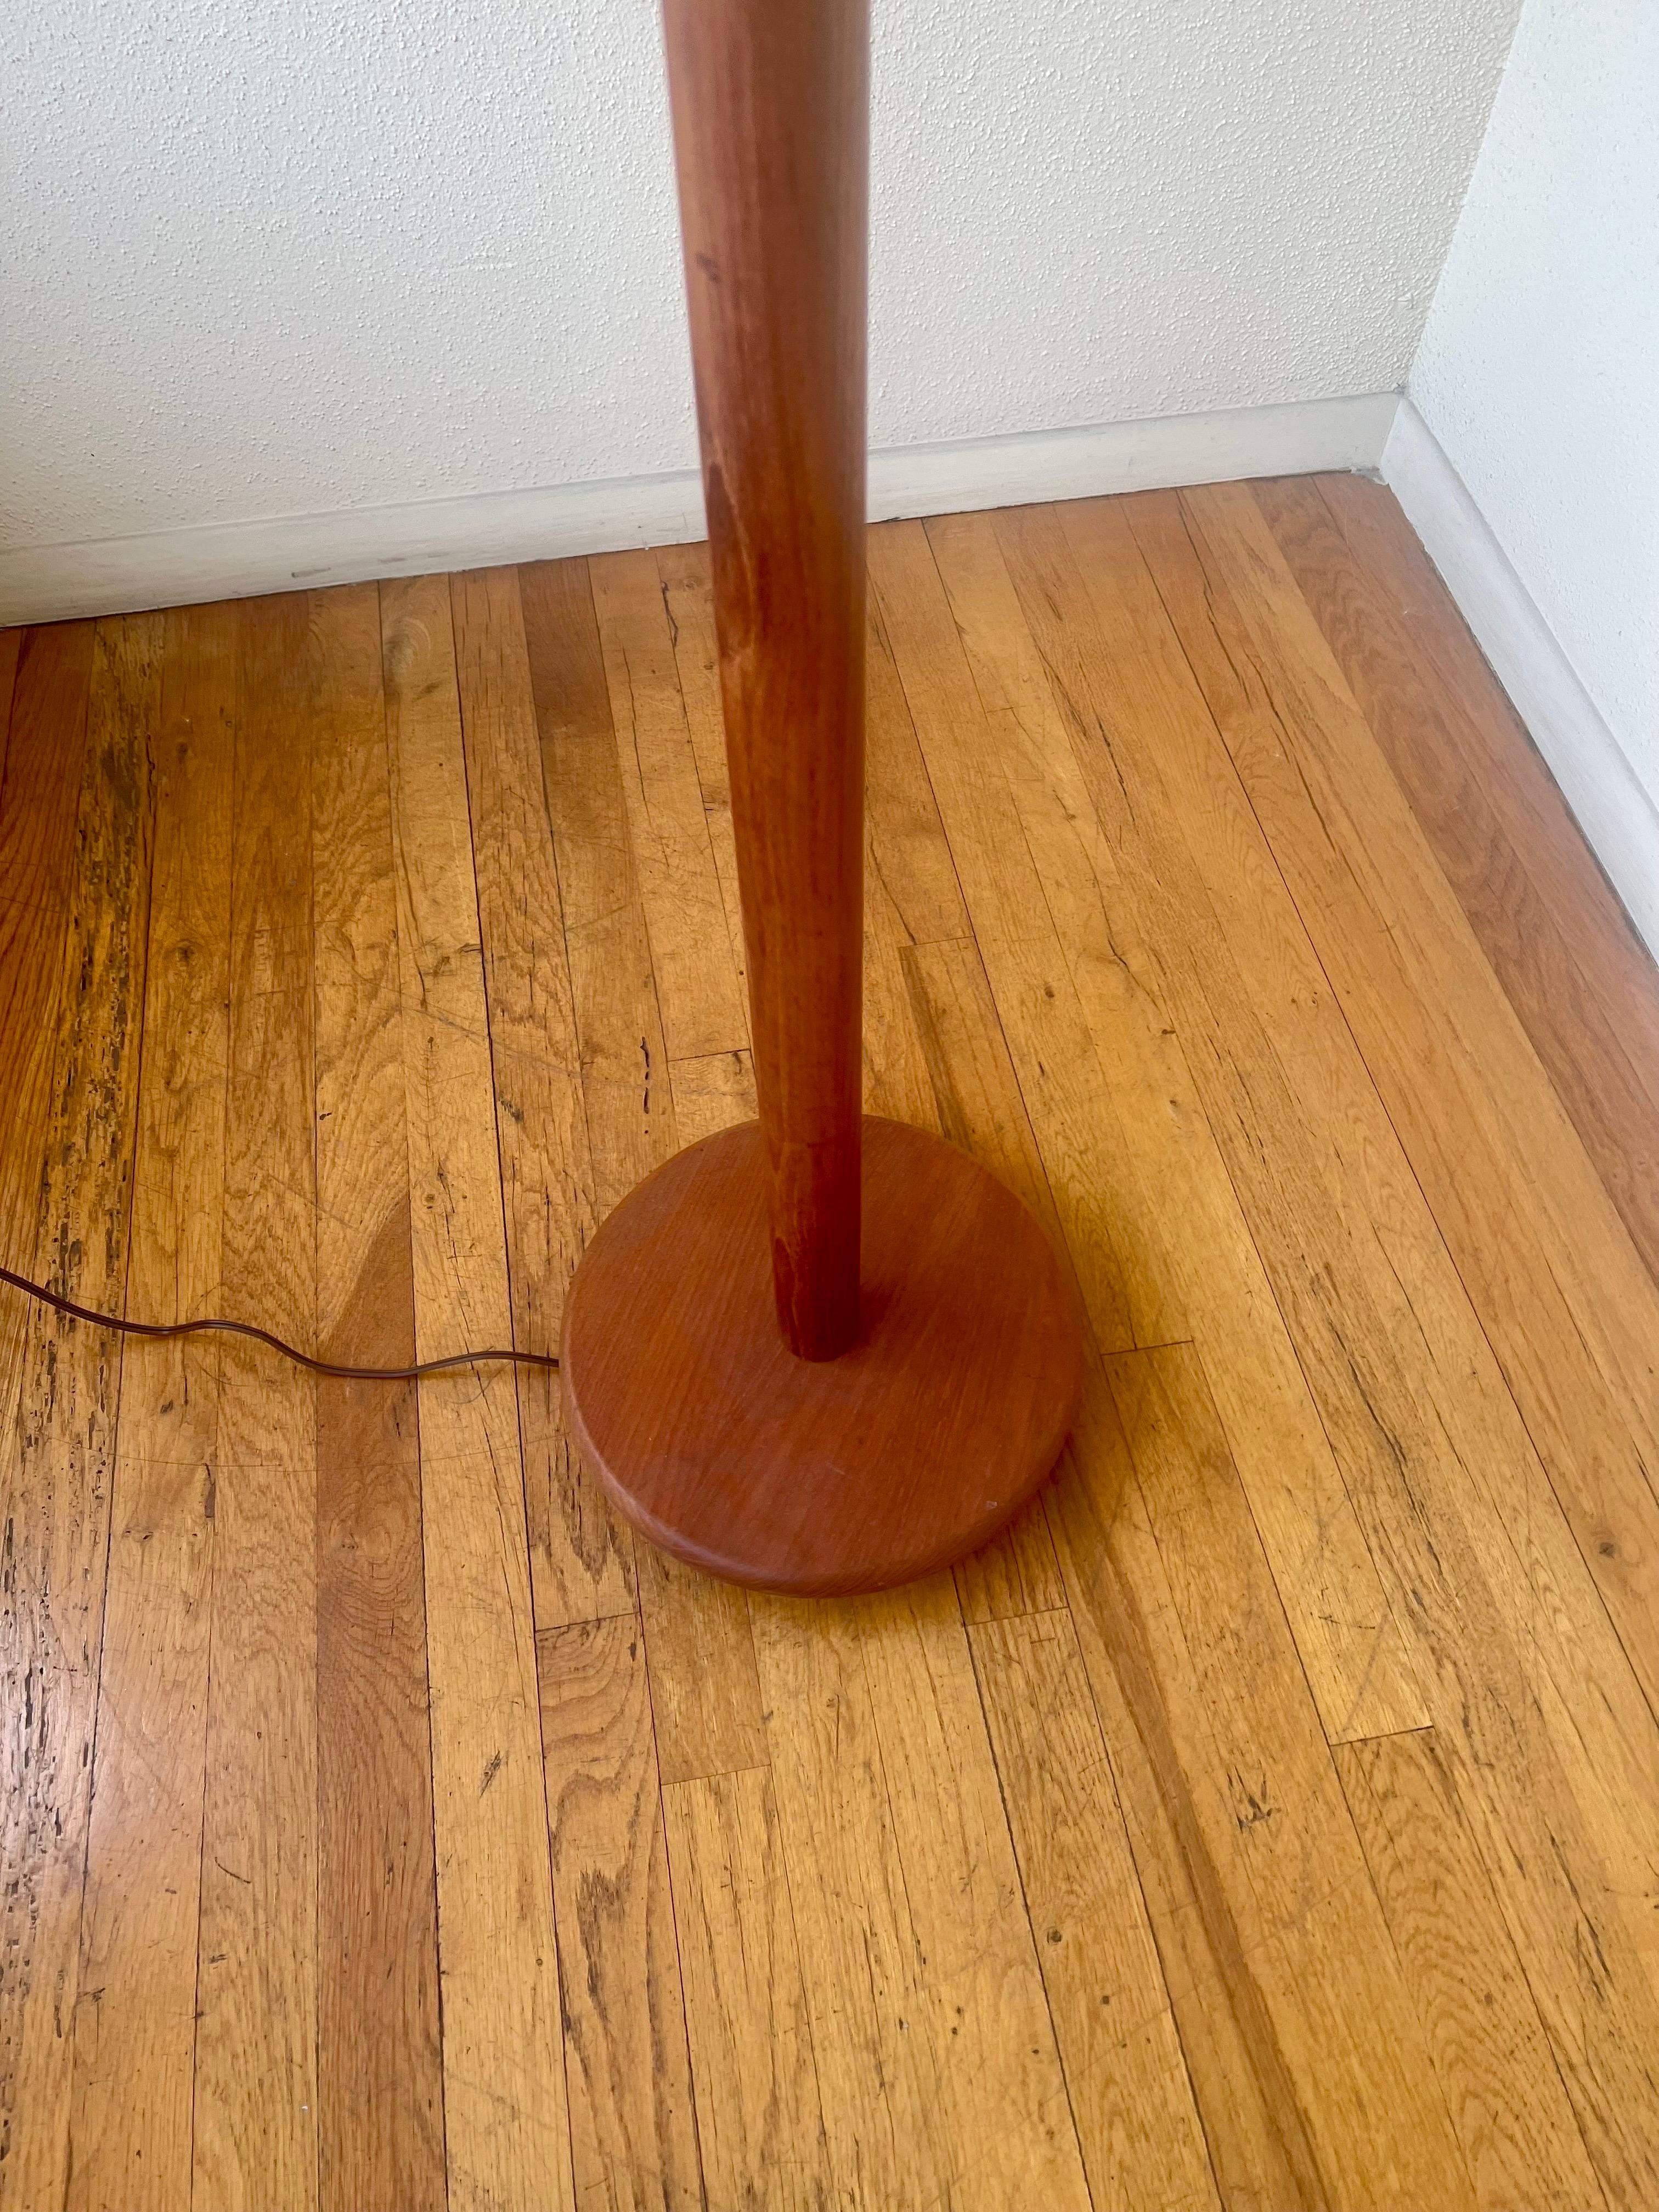 1970s Danish Modern Solid Teak & Brass Floor Lamps 2 Available In Excellent Condition For Sale In San Diego, CA